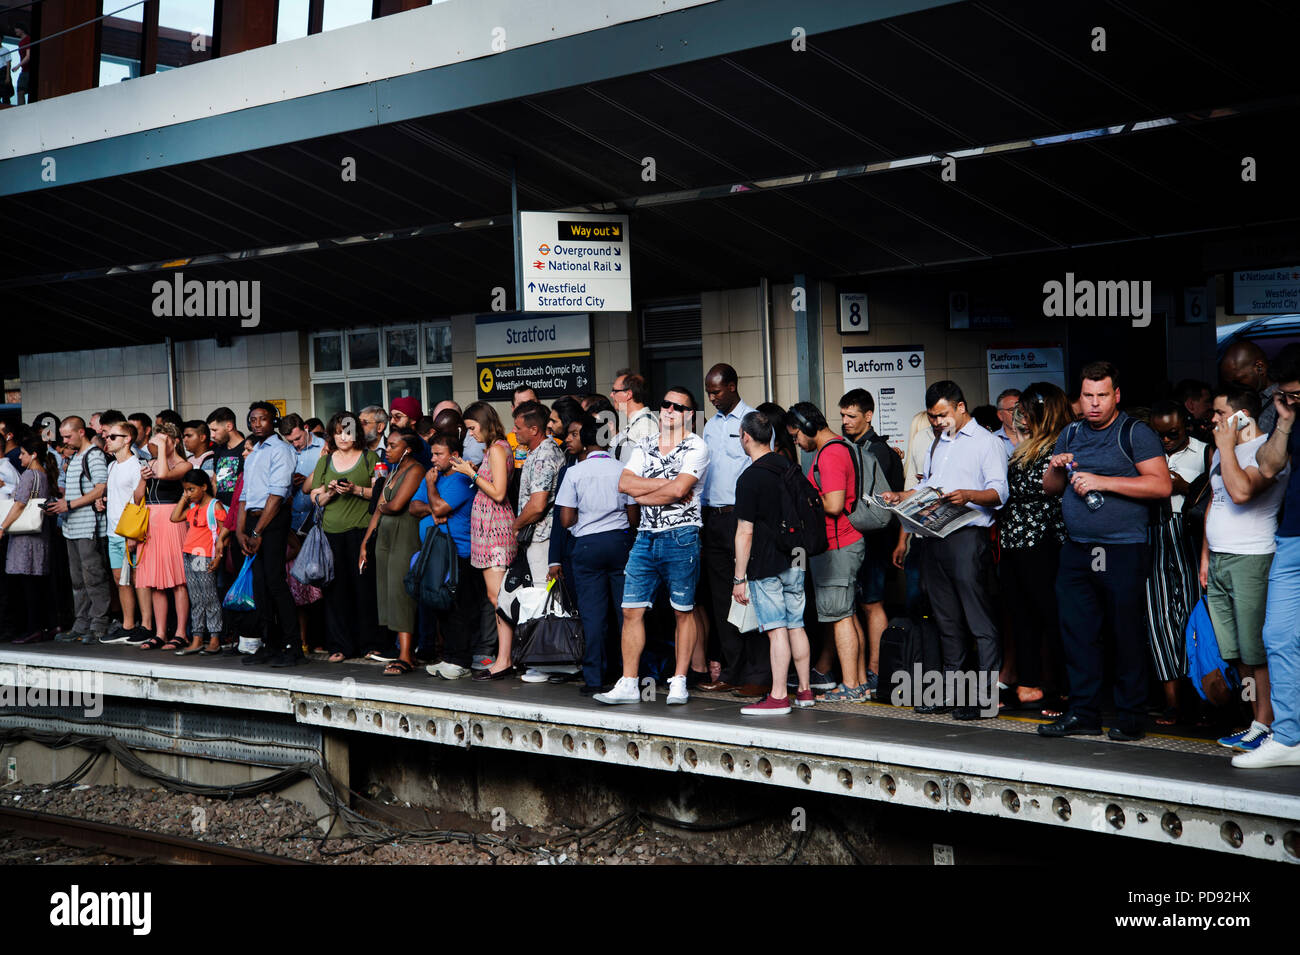 Stratford Station, London. Rush hour on a hot evening. Commuters wait for a delayed train to arrive Stock Photo